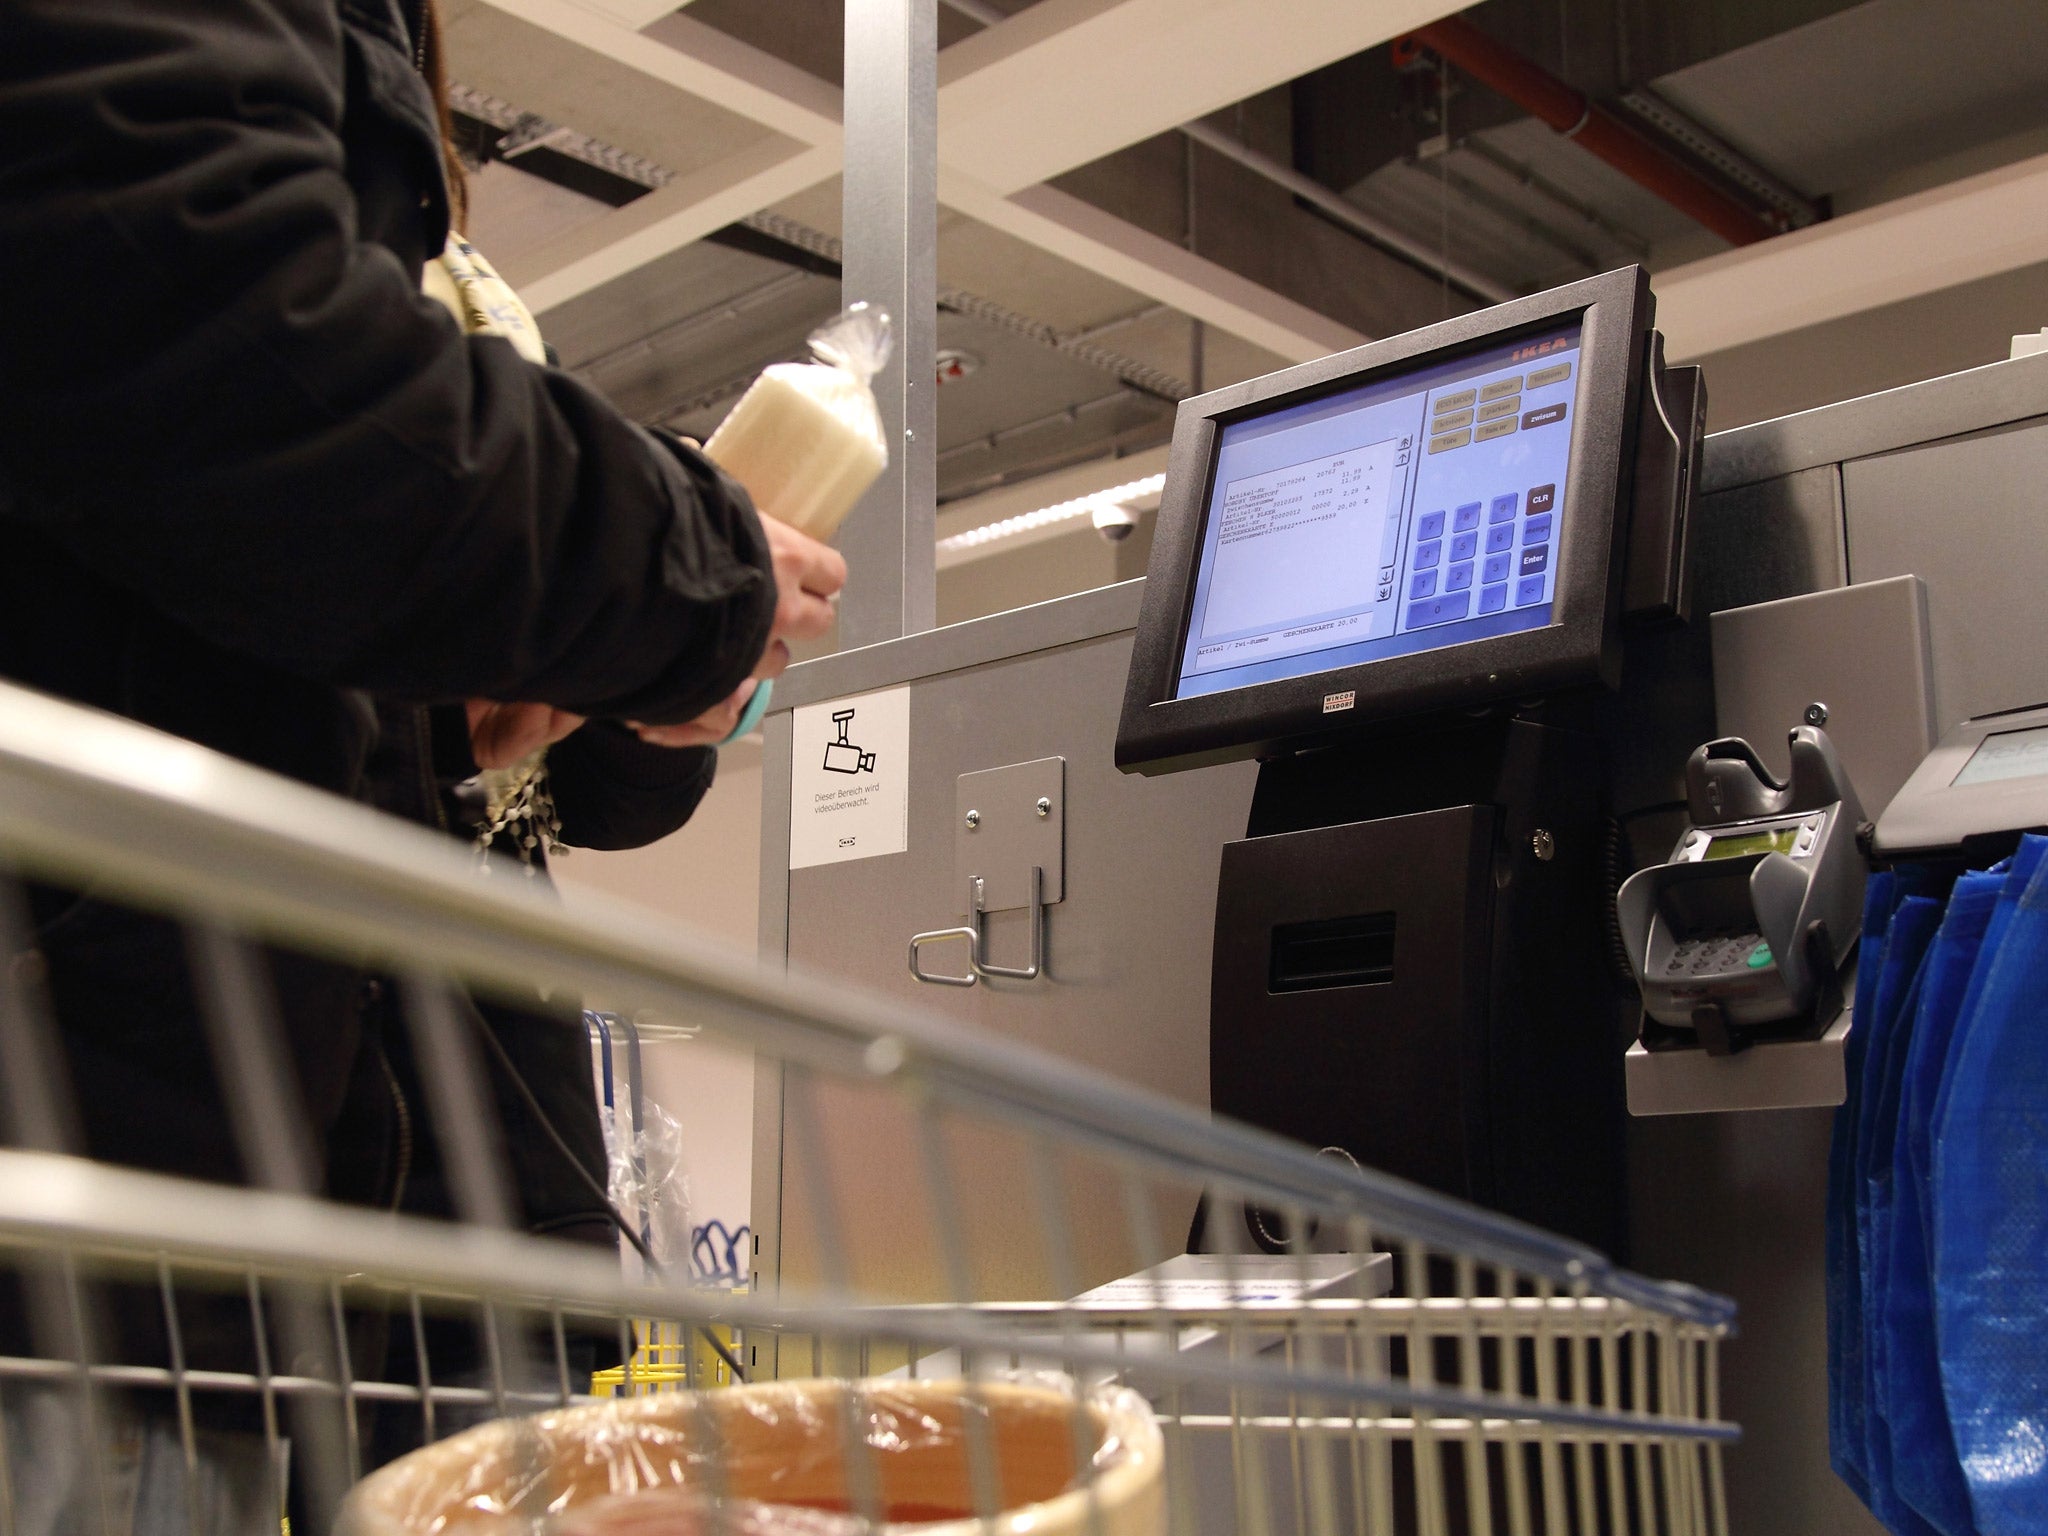 Have self service checkouts made shoplifting easier?